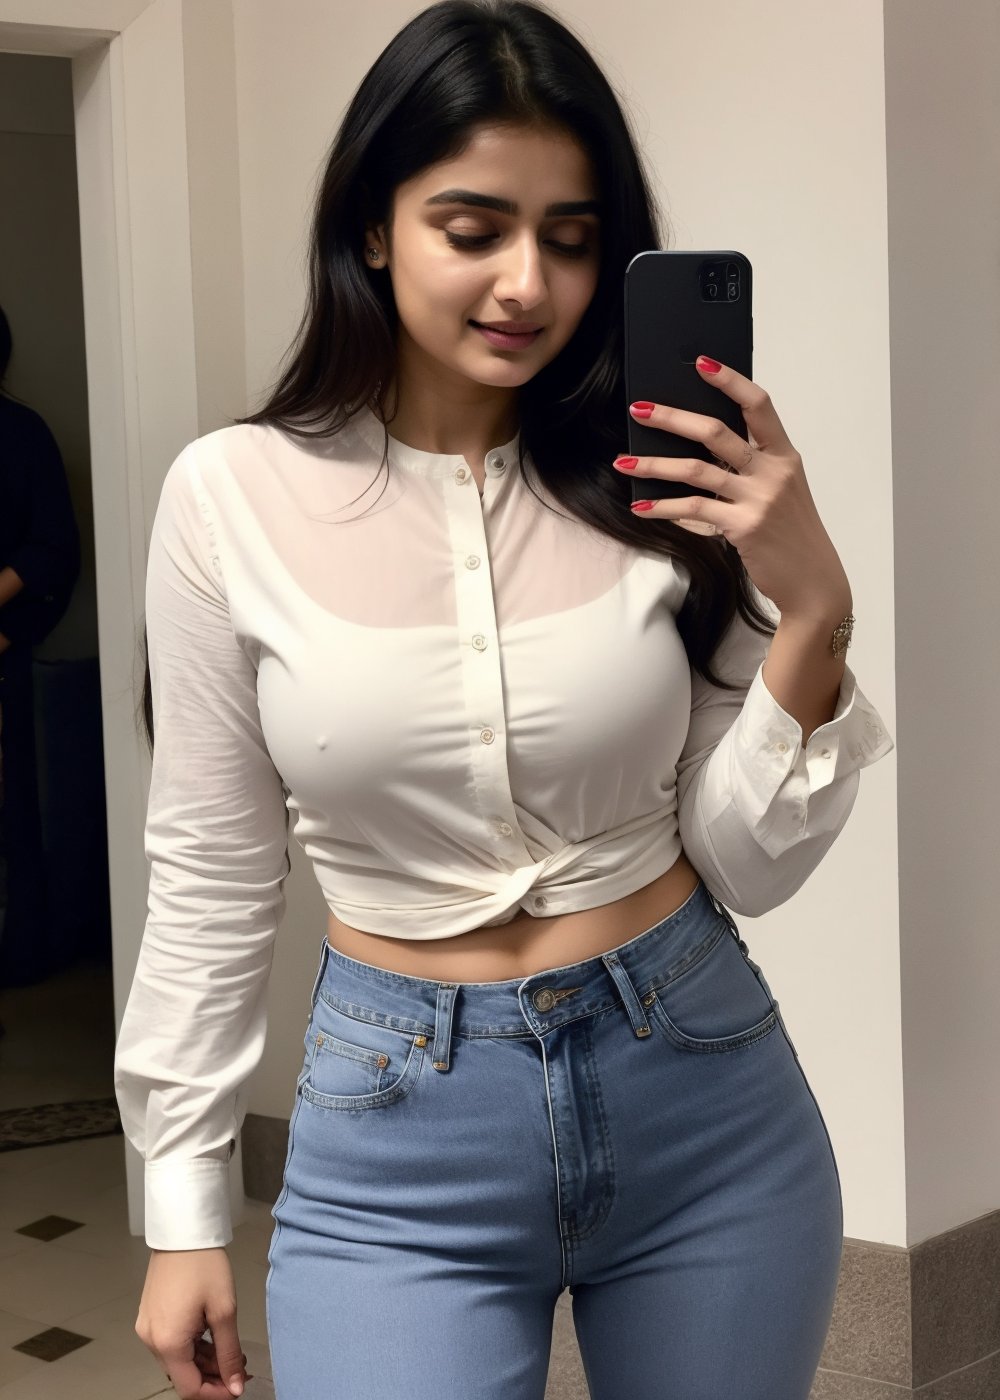 Lovely cute hot Alia Bhatt, acute an Instagram model 22 years old, full-length, long blonde_hair, black hair, winter, in a Mal , Indian, wearing a jeans shirt, Lives text on top, thin shaped_body,